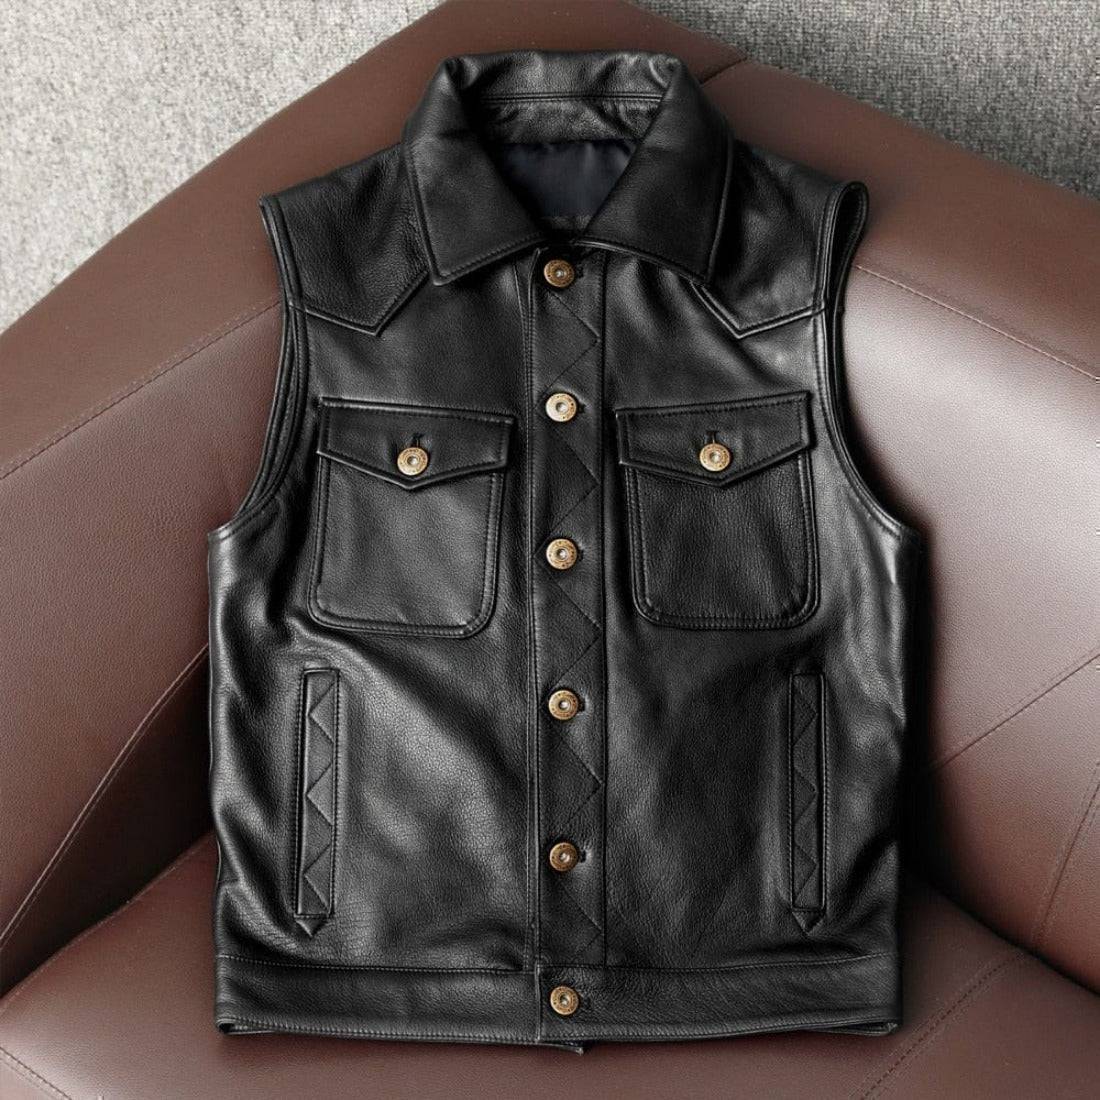 Classic Motor Rider cowhide vest for bikers4